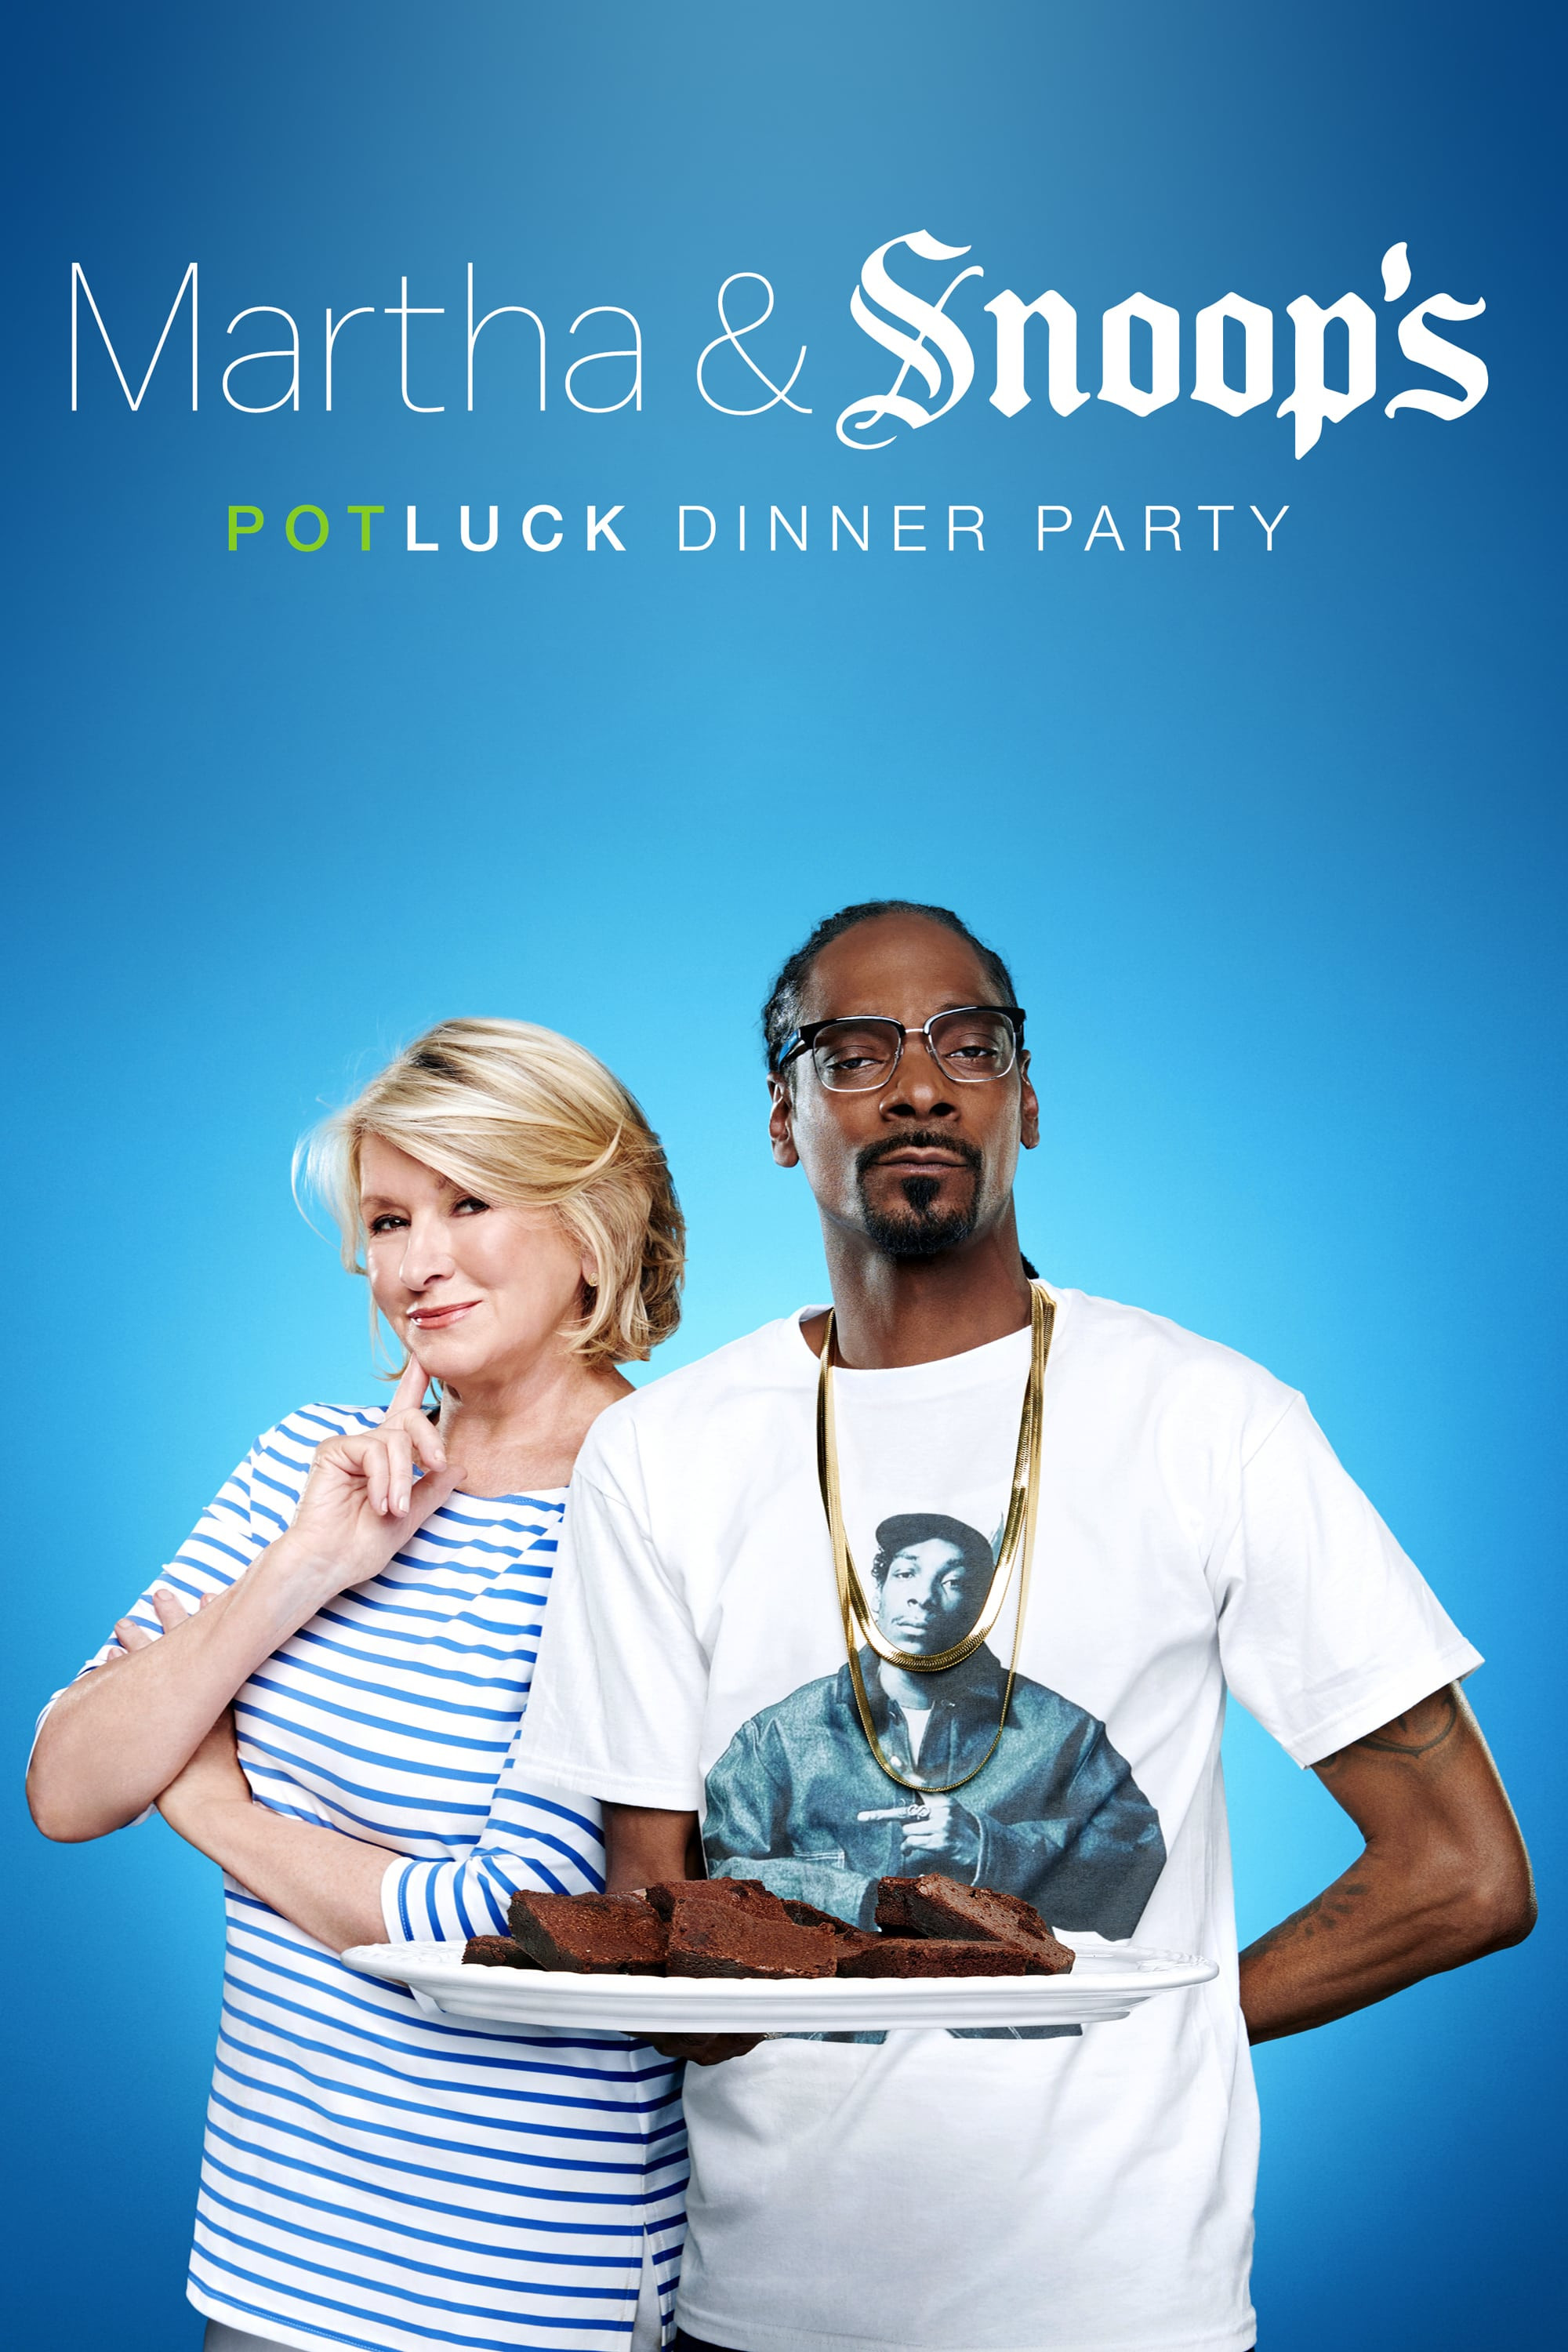 Martha And Snoops Potluck Dinner Party
 Martha & Snoop s Potluck Dinner Party TV Series 2016